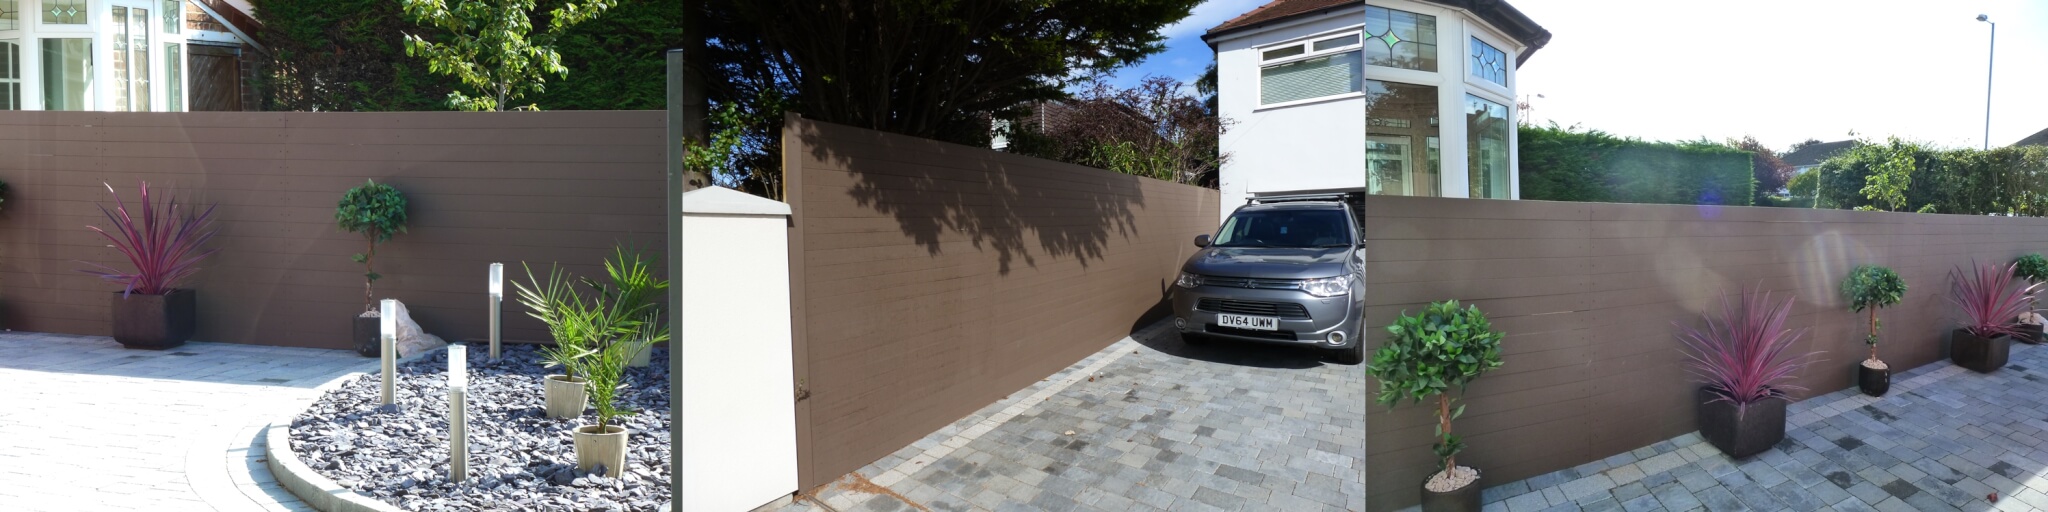 Composite Fencing Installations Cheshire